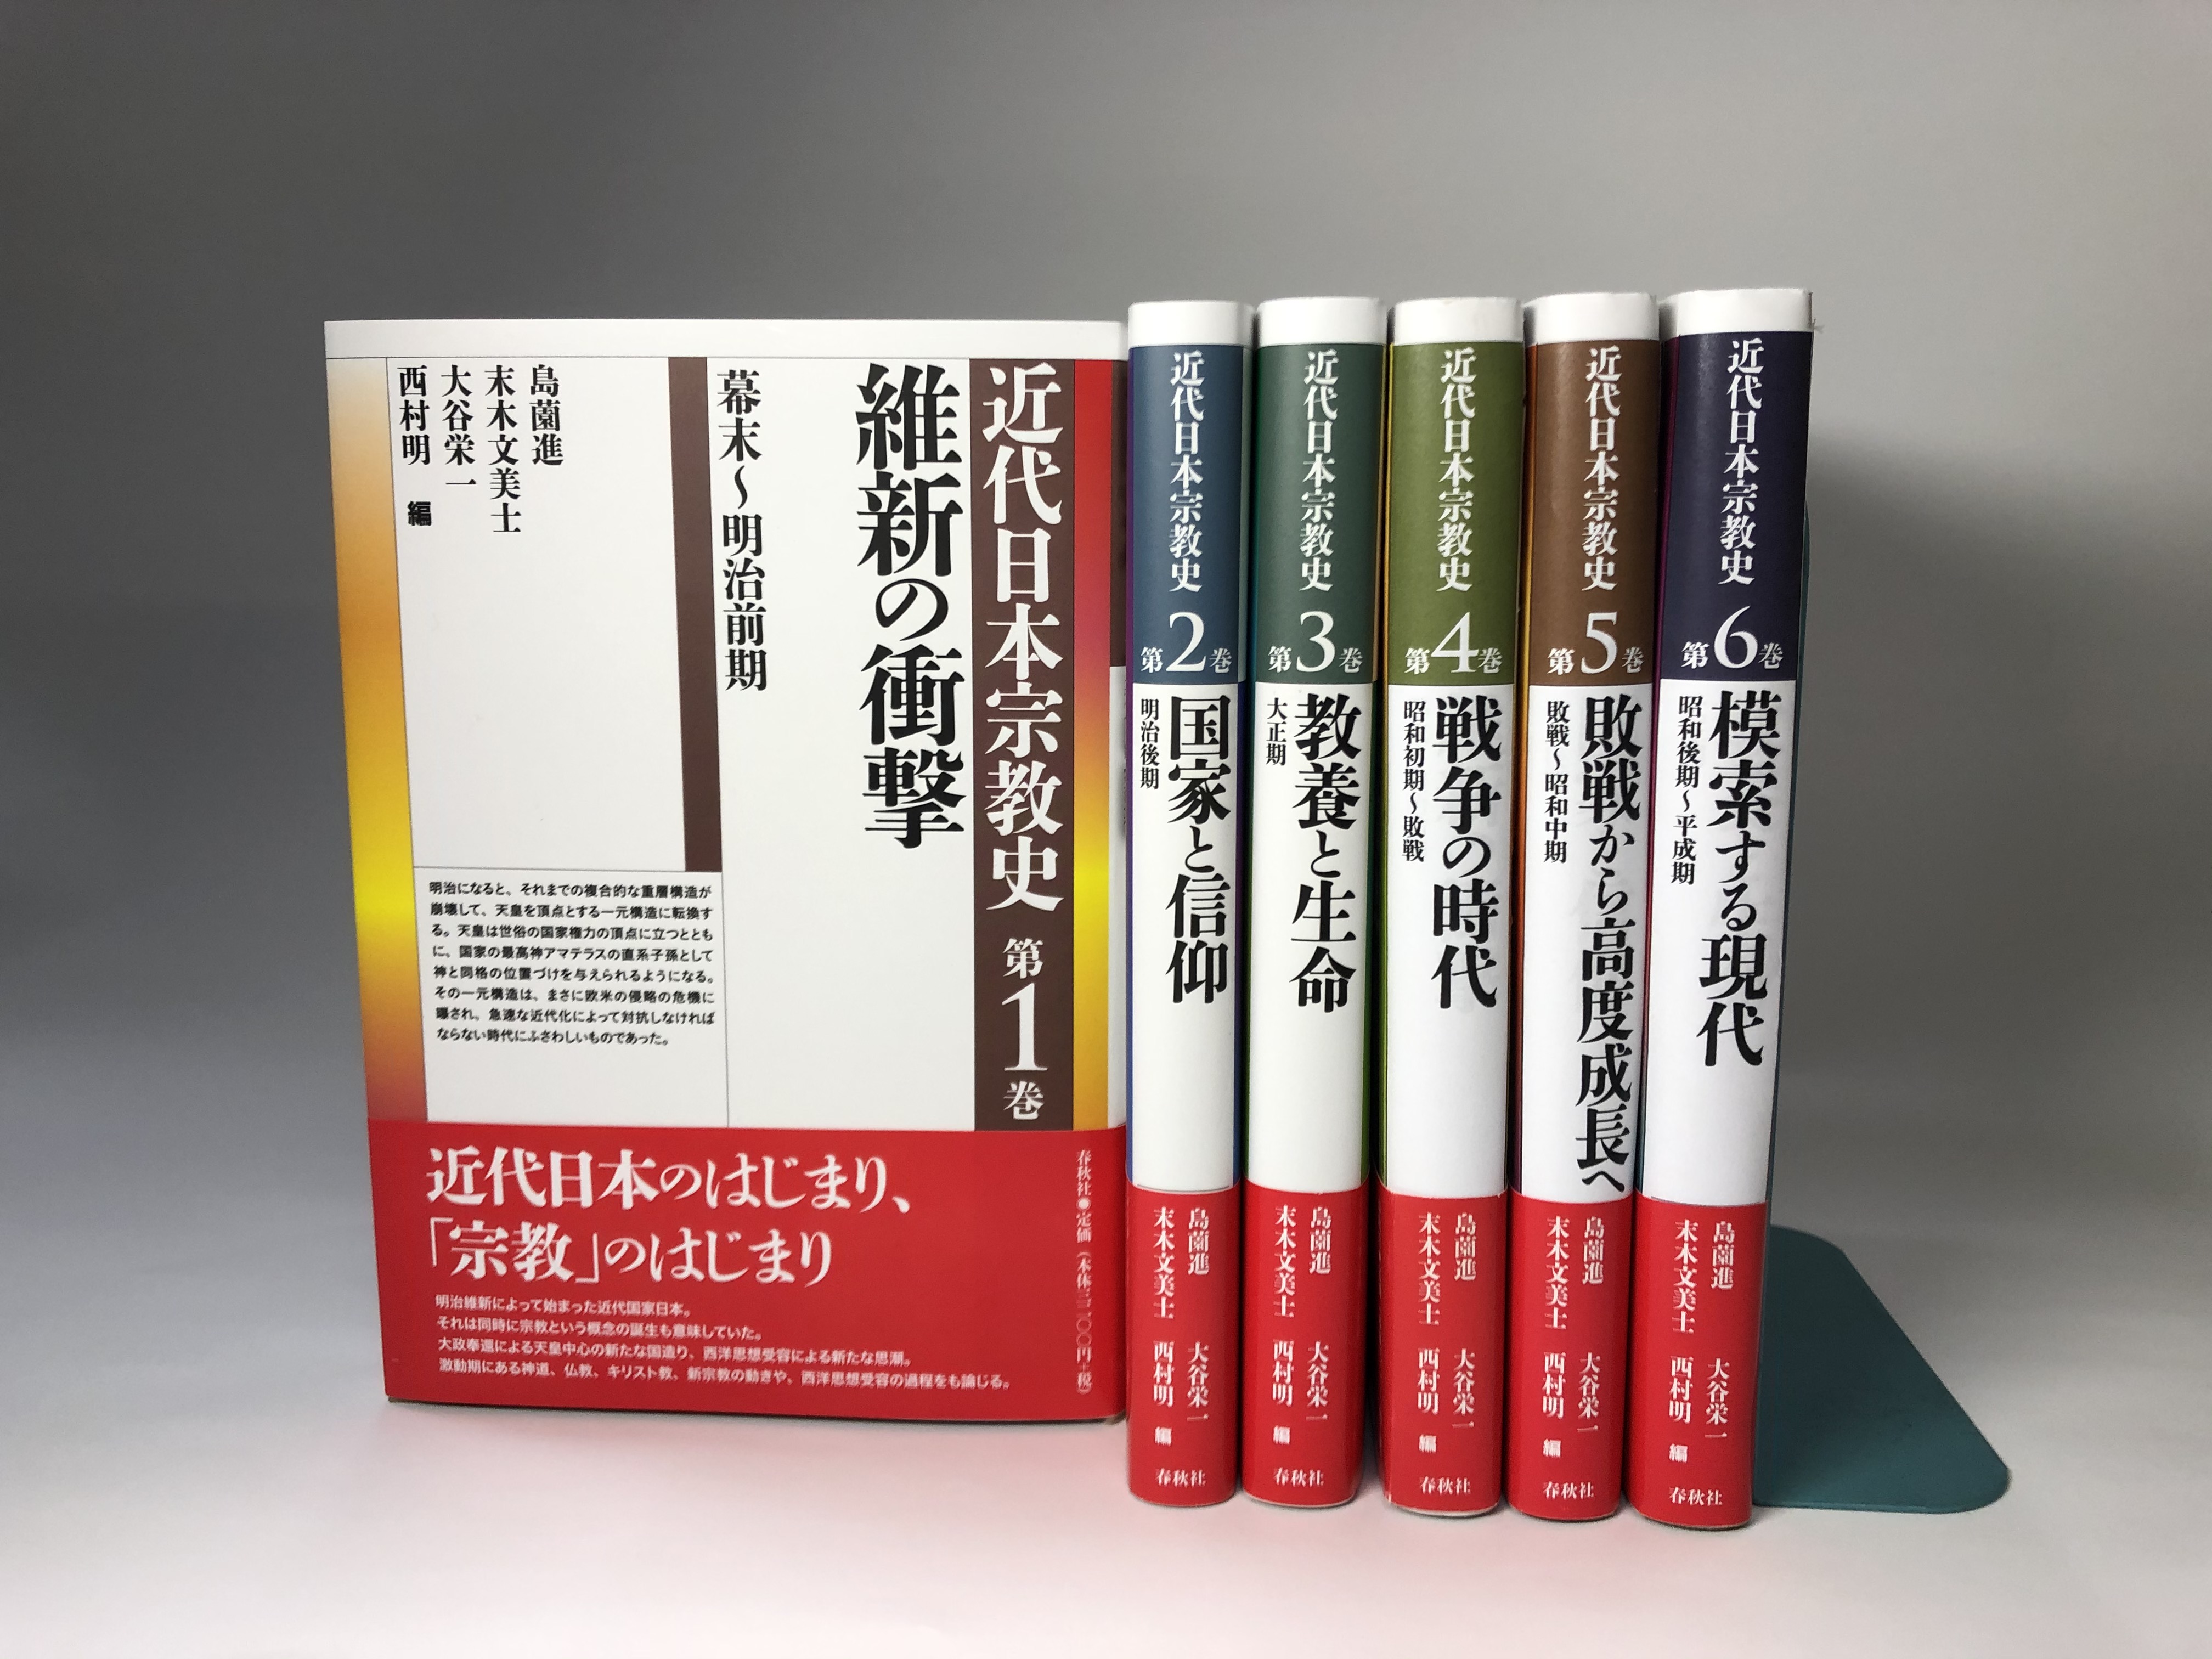 A series of 6 books, an accent of color-gradation on white cover with title on each book